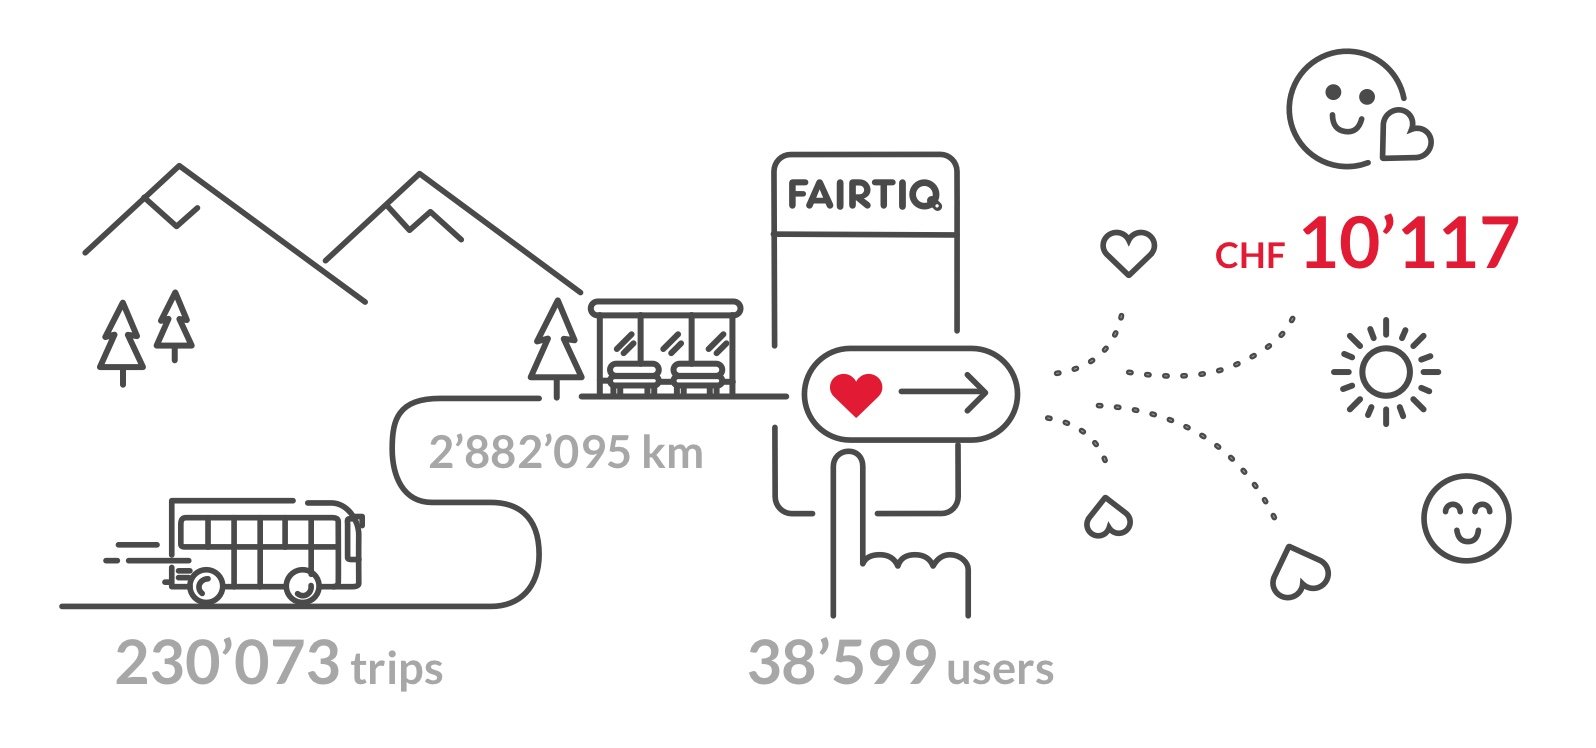 Together we travel, together we donate | FAIRTIQ